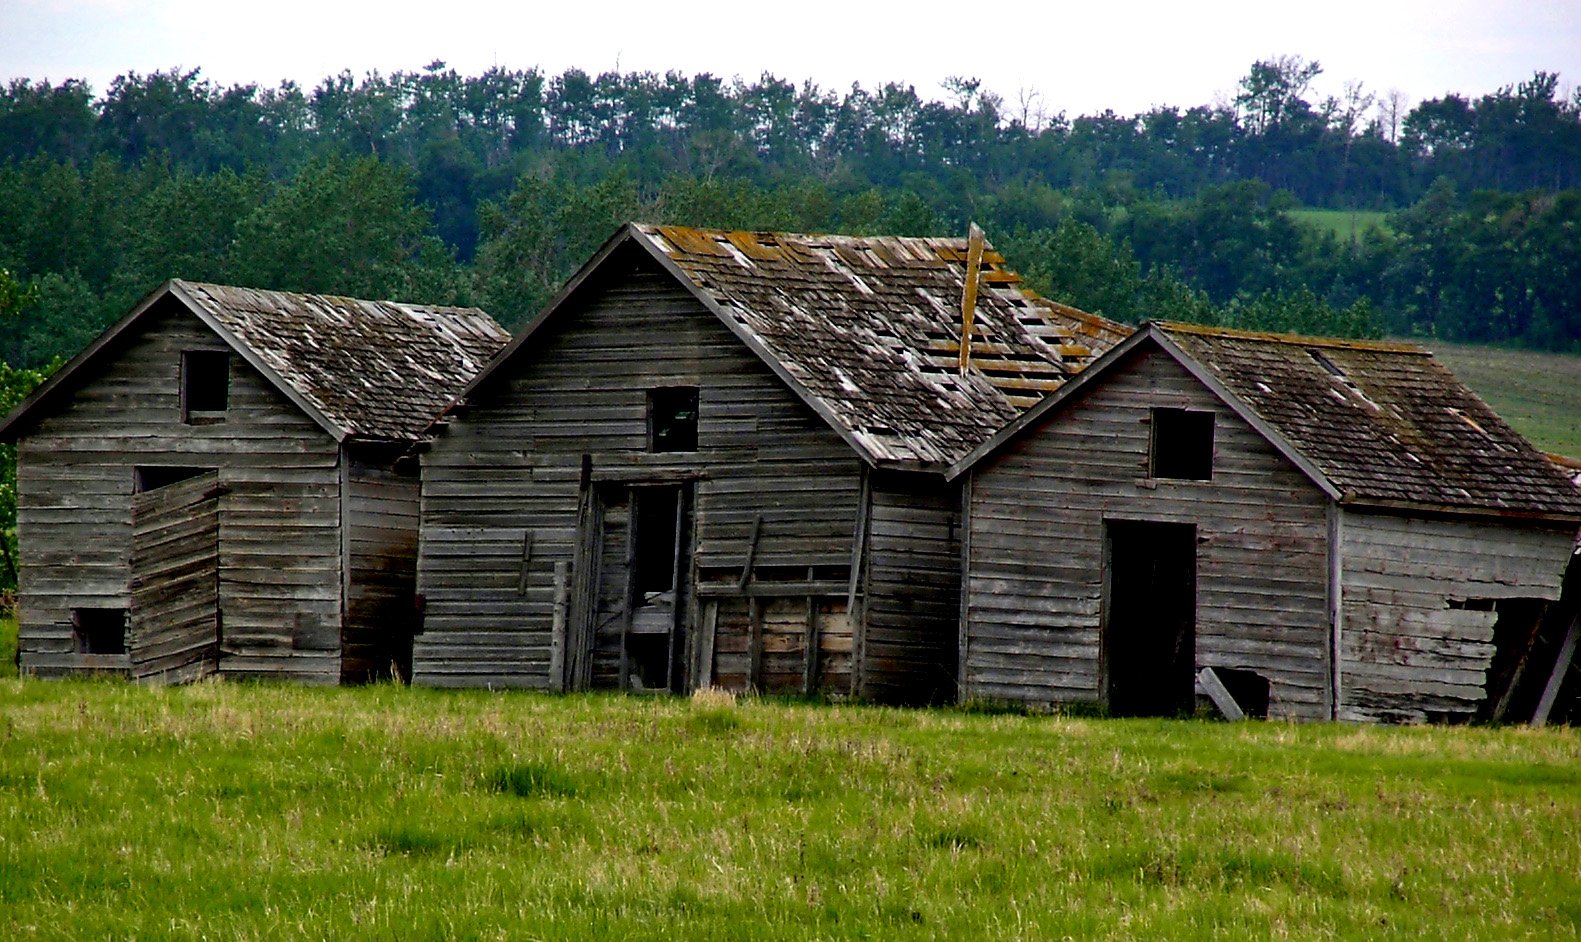 two old wooden houses sit in the field